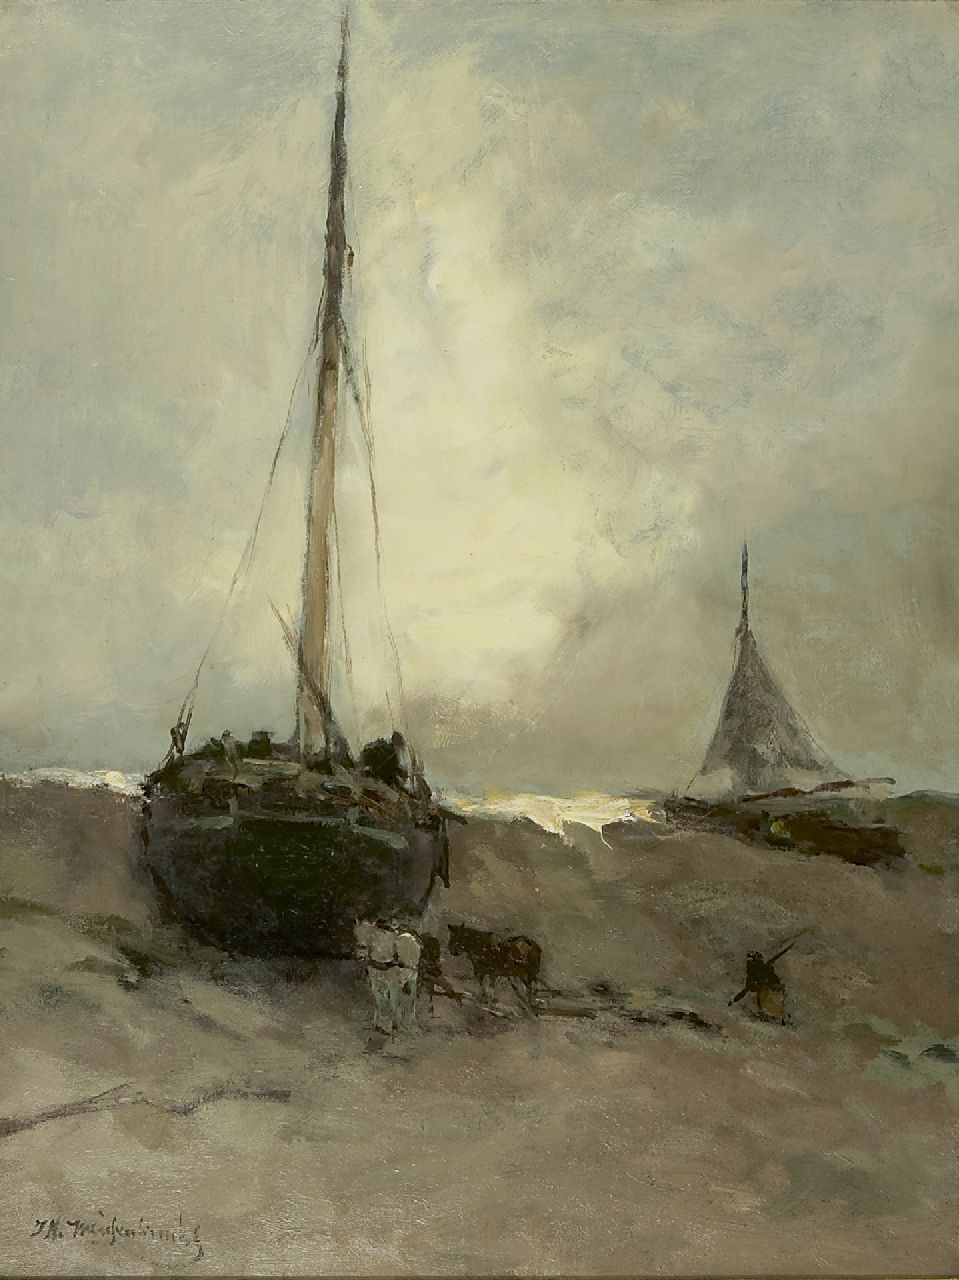 Weissenbruch H.J.  | Hendrik Johannes 'J.H.' Weissenbruch, Fishing boats on the beach, oil on canvas 56.0 x 43.0 cm, signed l.l.